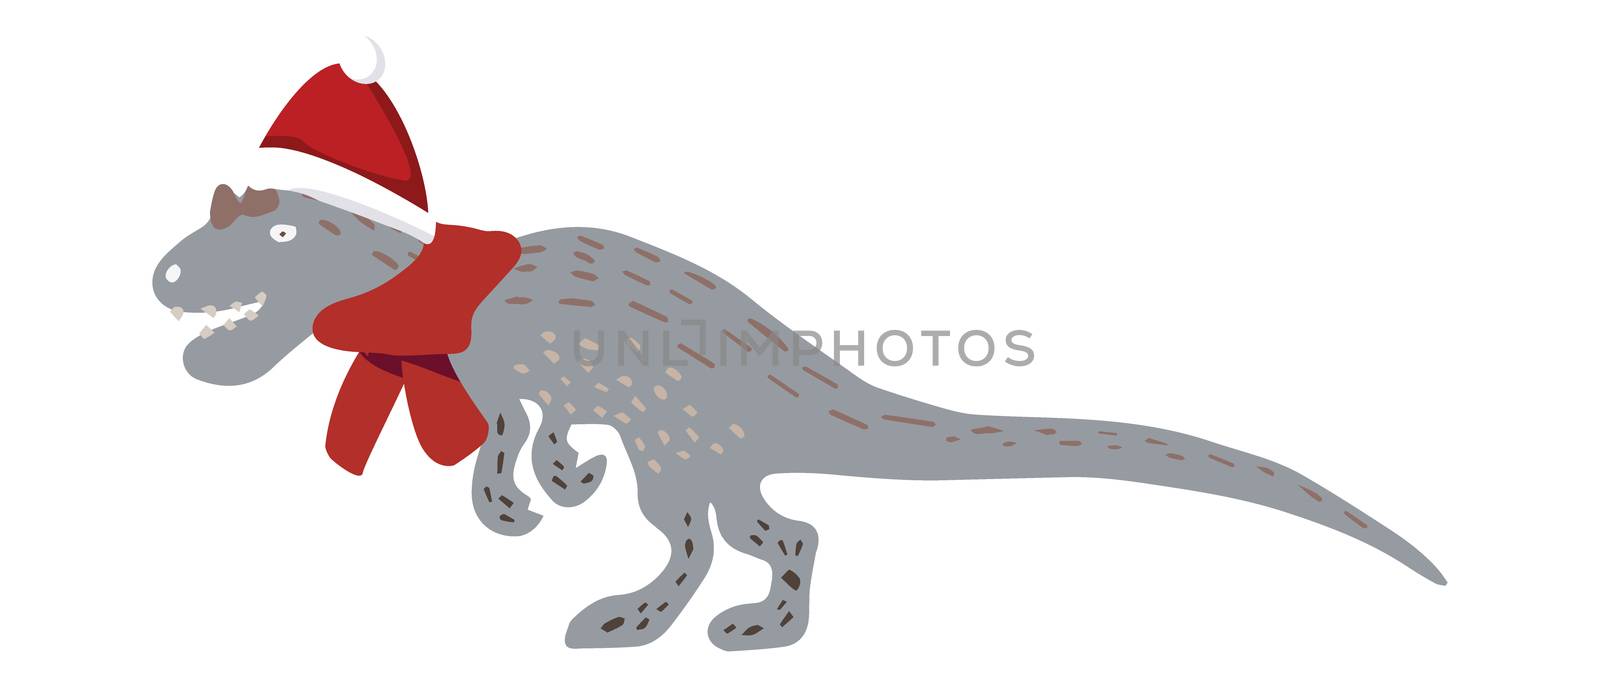 Christmas Dinosaur with red Santa hat and red scarf isolated on white backgound. Merry Christmas and Happy New Year composition design print for cards, stickers, apparel, home decor. Vector.